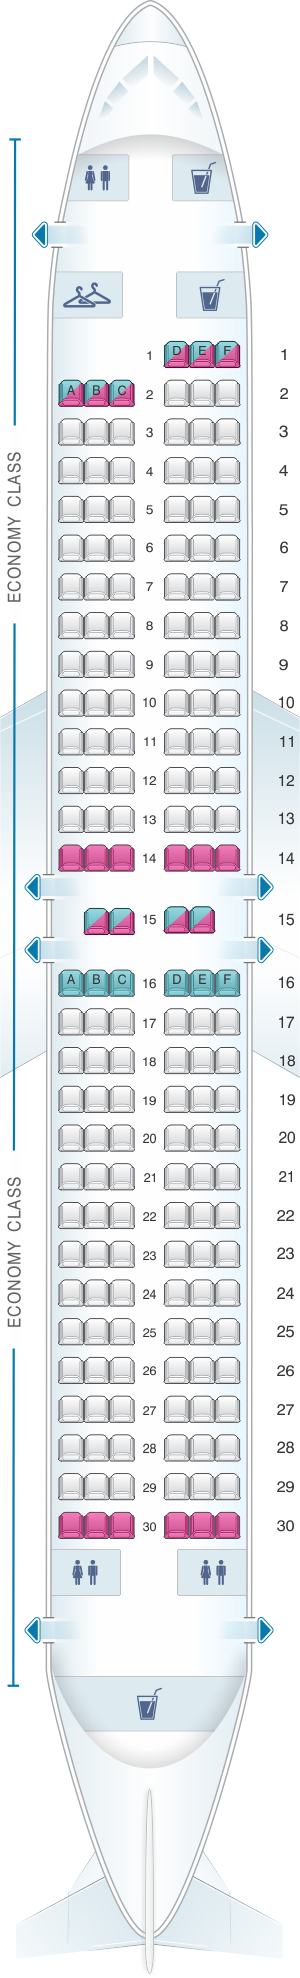 seat assignments southwest airlines